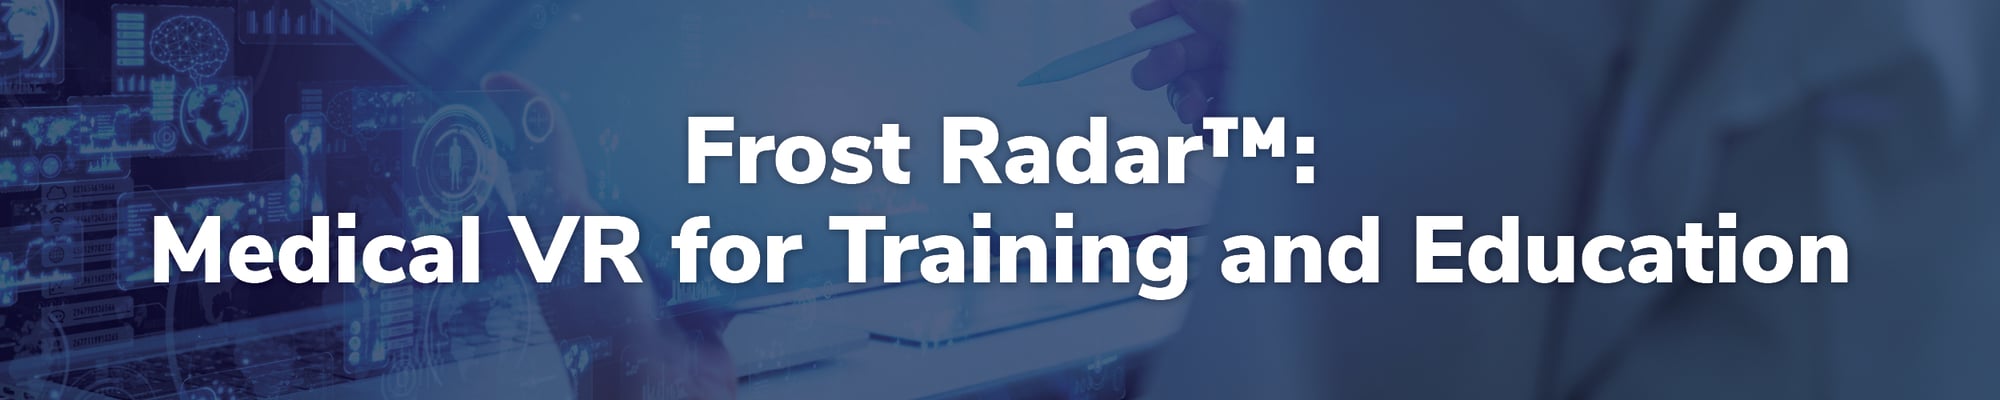 Frost Radar™: Medical VR for Training and Education